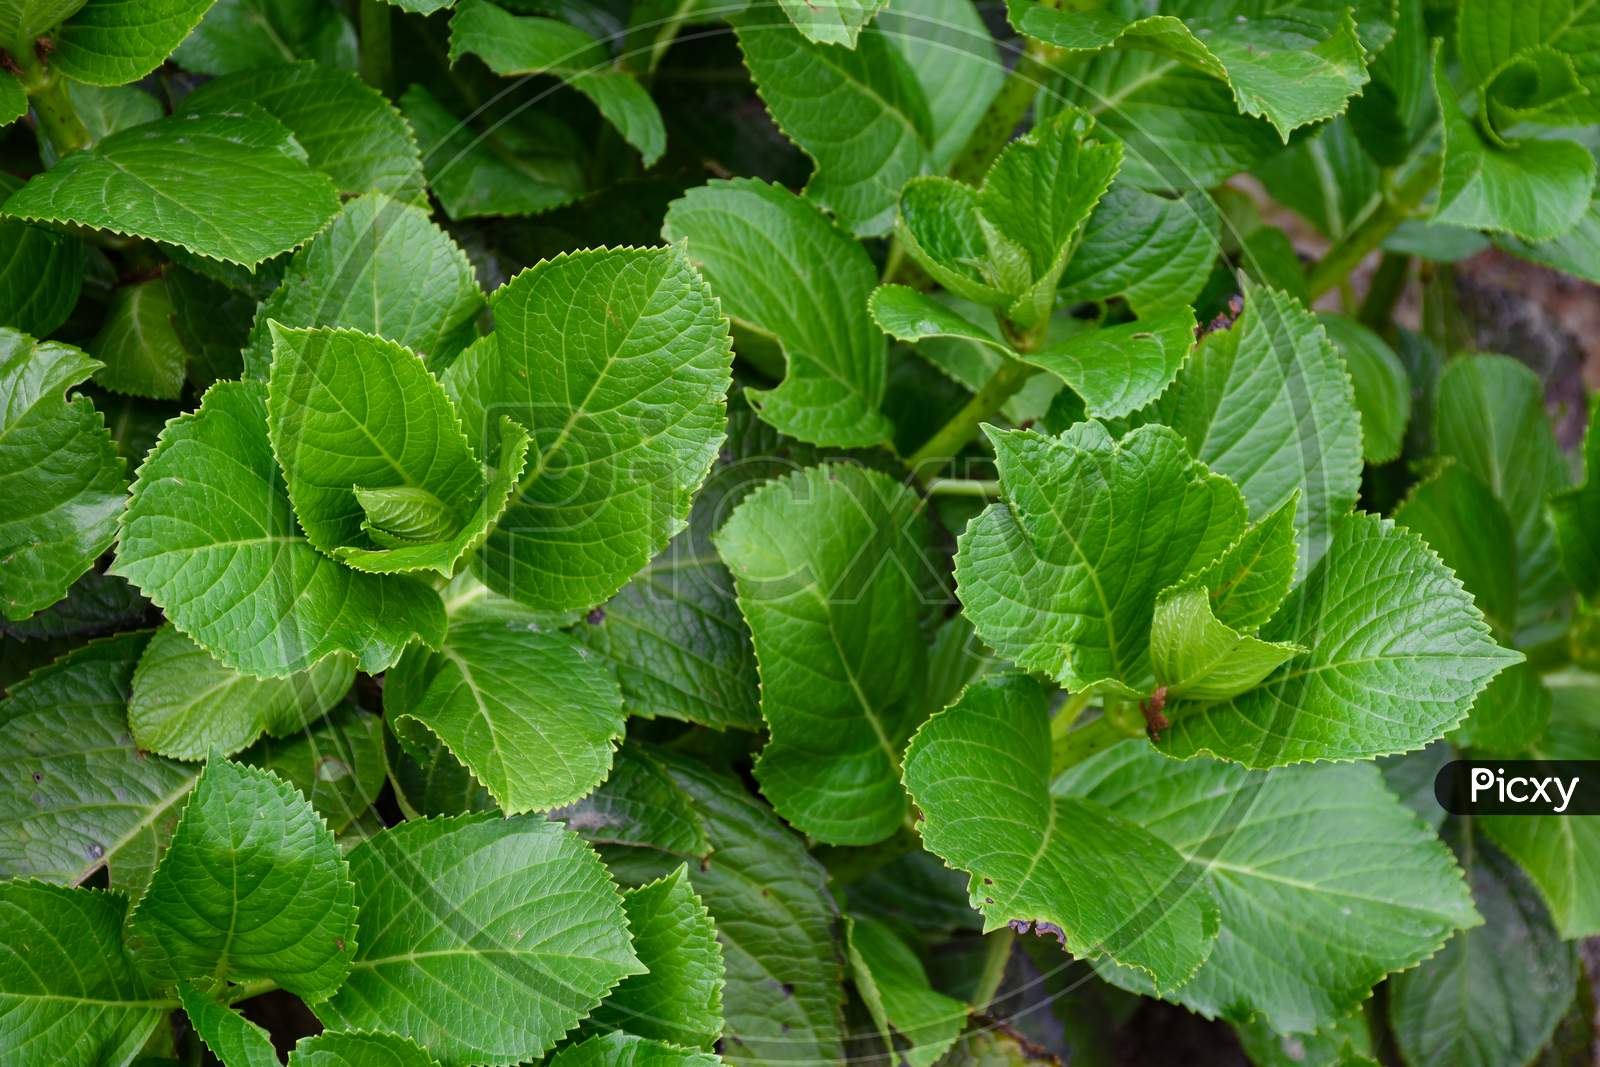 Hydrangea Leaves, Leaves Are Thick, Shiny And Heart-Shaped